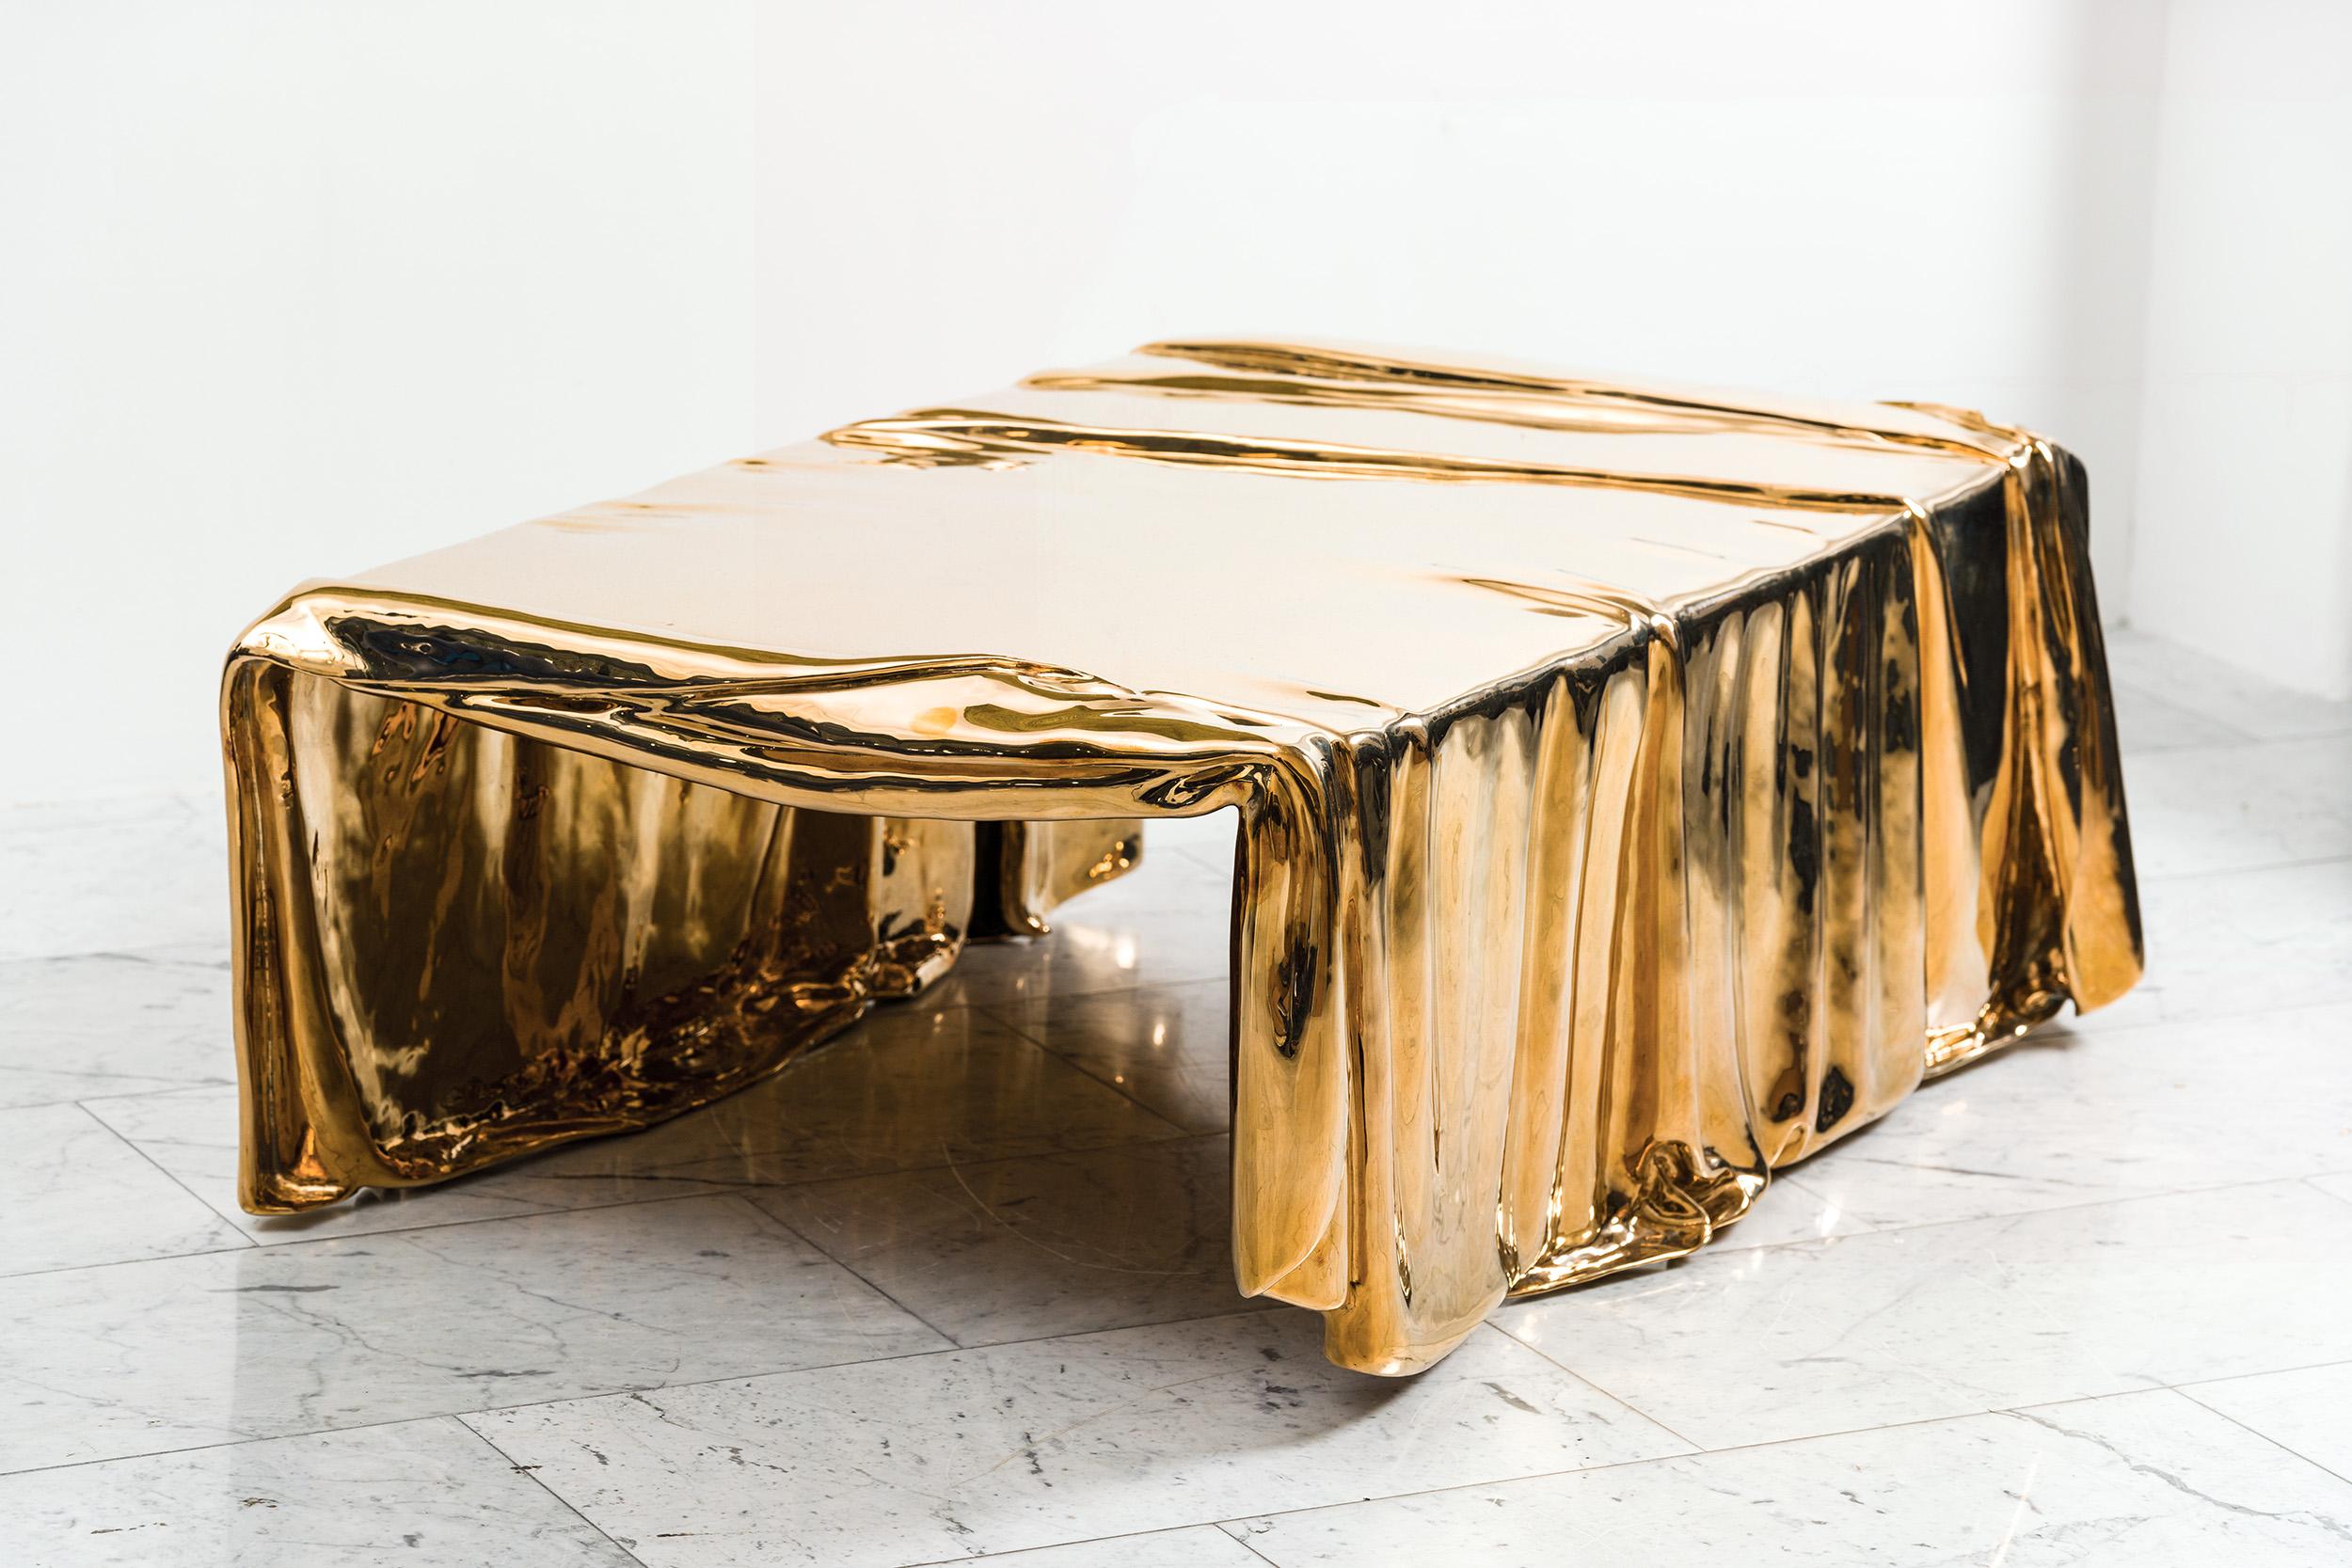 Vela Coffee Table, from the Levitaz Collection, embodies contemporary design through its unique marriage of material and form. Cast in bronze, this coffee table takes on the illusion of fluidity, with a surface that seems to drape and fold over